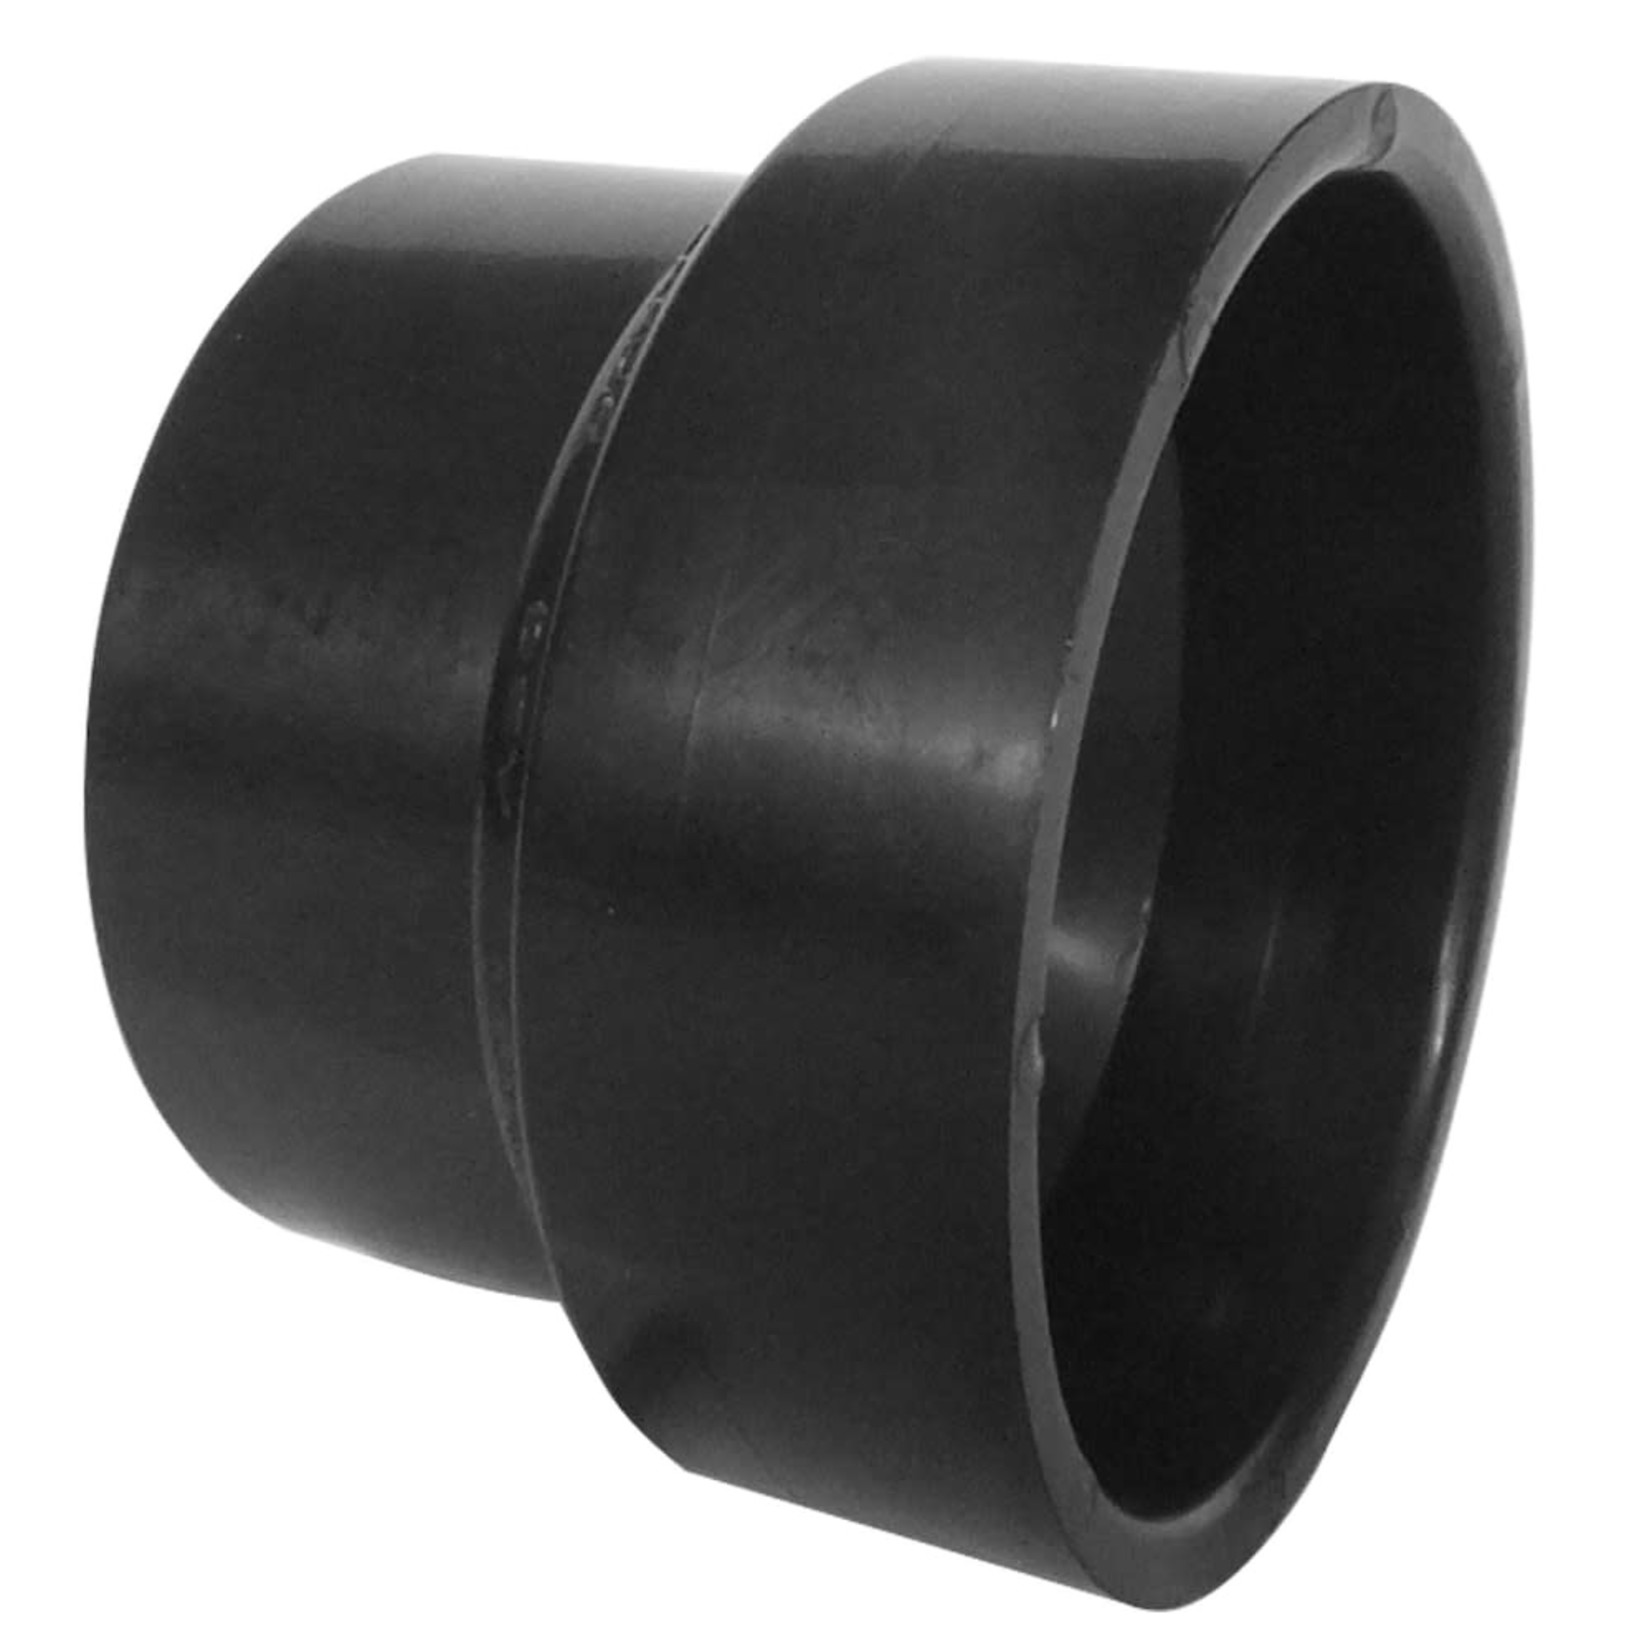 Lesso 3 x 1-1/2 In. ABS Reducing Coupling All Hub